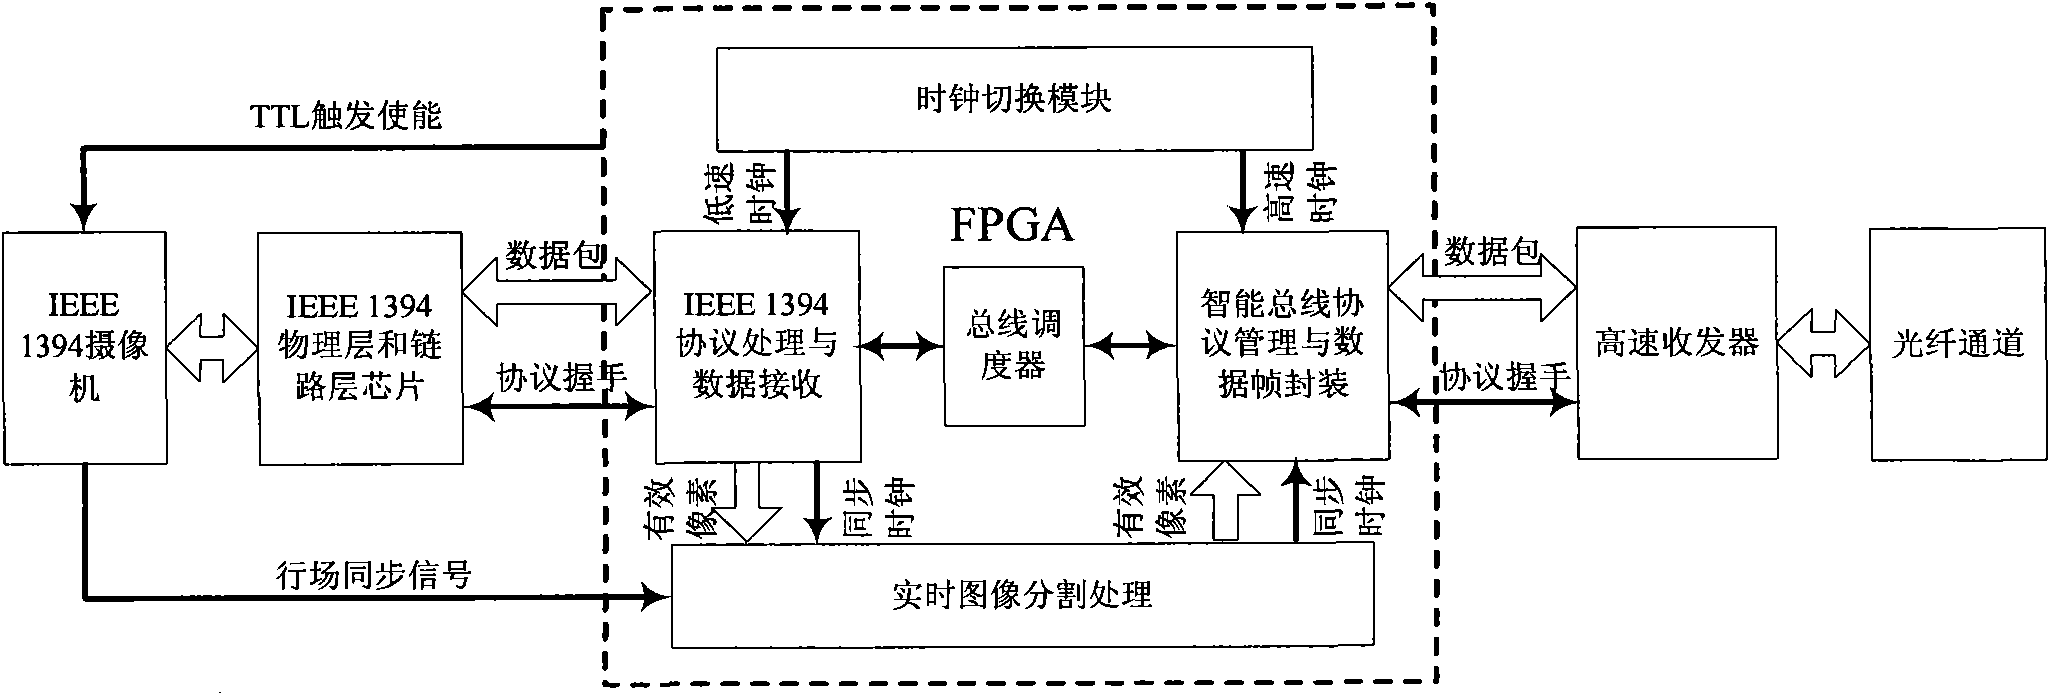 Real-time image segmentation processing system and high-speed intelligent unified bus interface method based on Institute of Electrical and Electronic Engineers (IEEE) 1394 interface